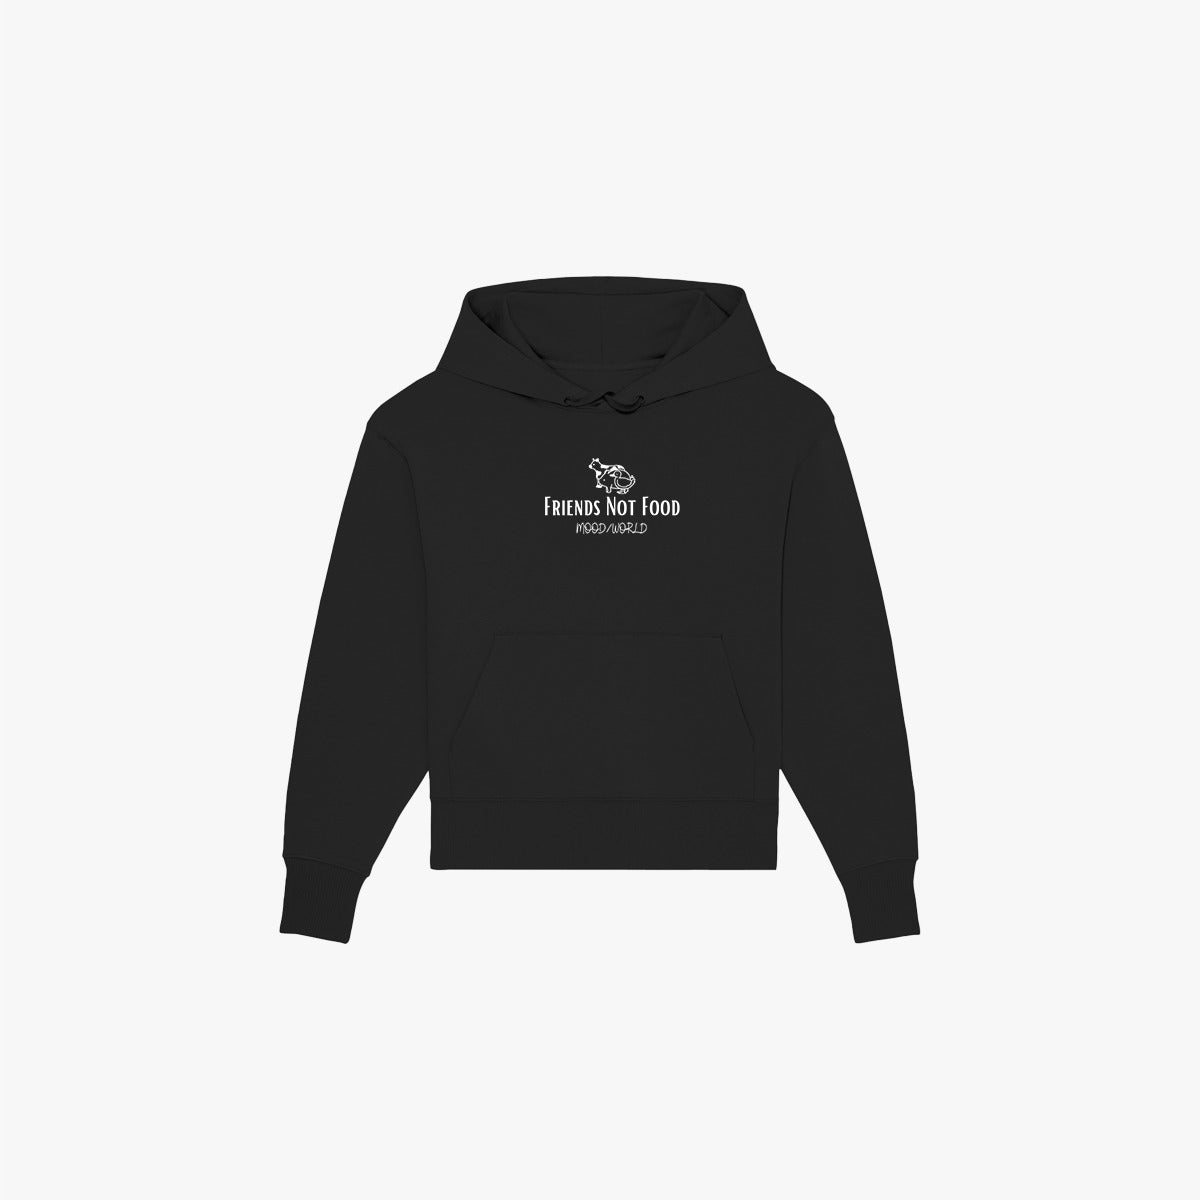 'FRIENDS NOT FOOD Signature' Organic Oversize Hoodie in der Farbe Black